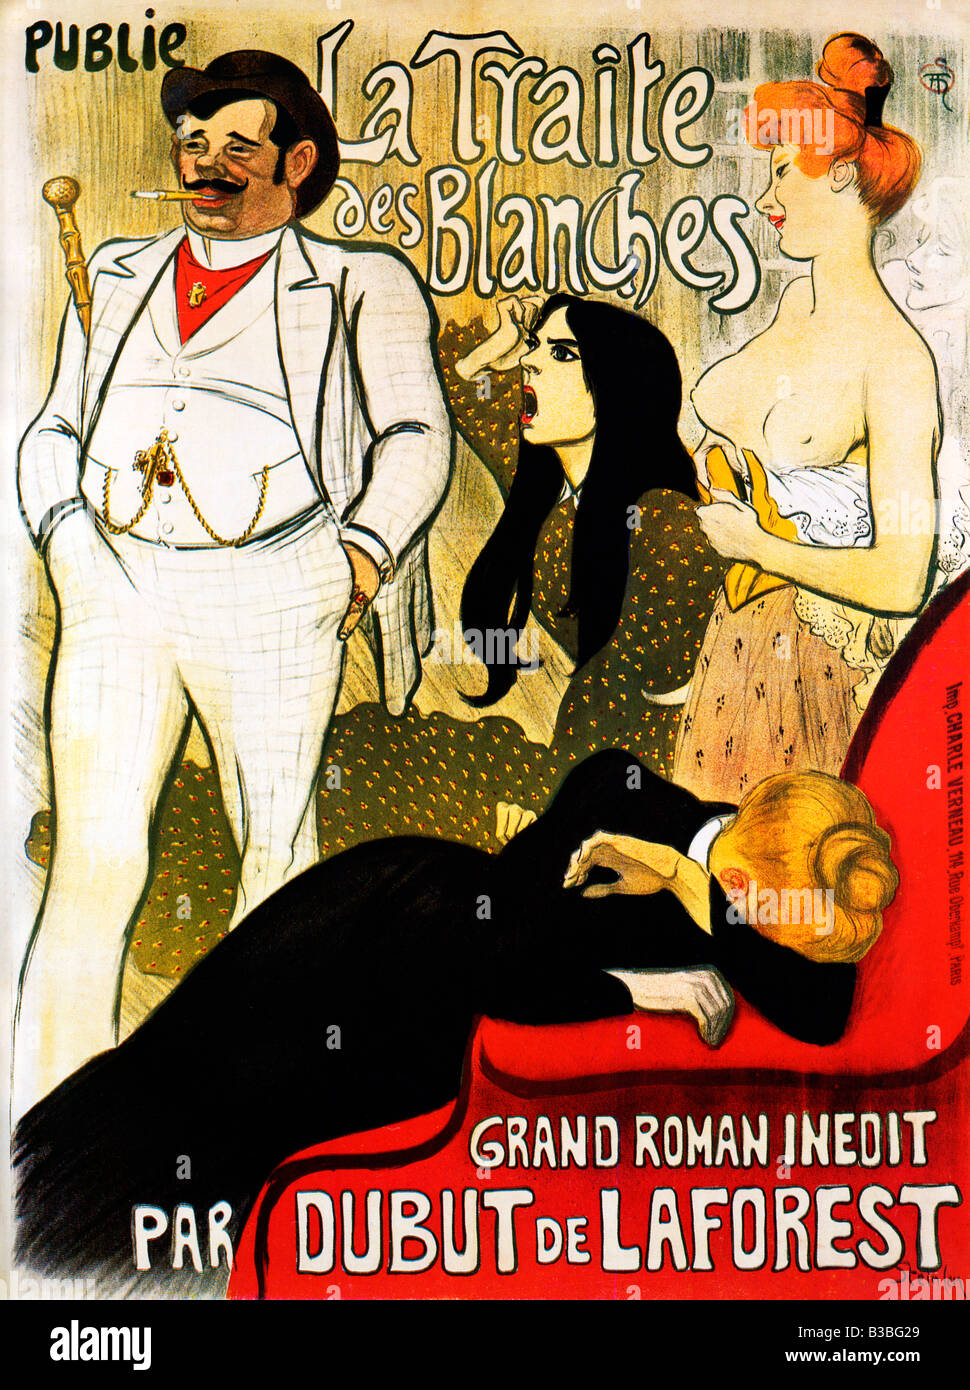 Steinlen La Traite Des Blanches 1900 Art Nouveau poster by Theophile Steinlen to publicise the novel about the White Slave Trade Stock Photo